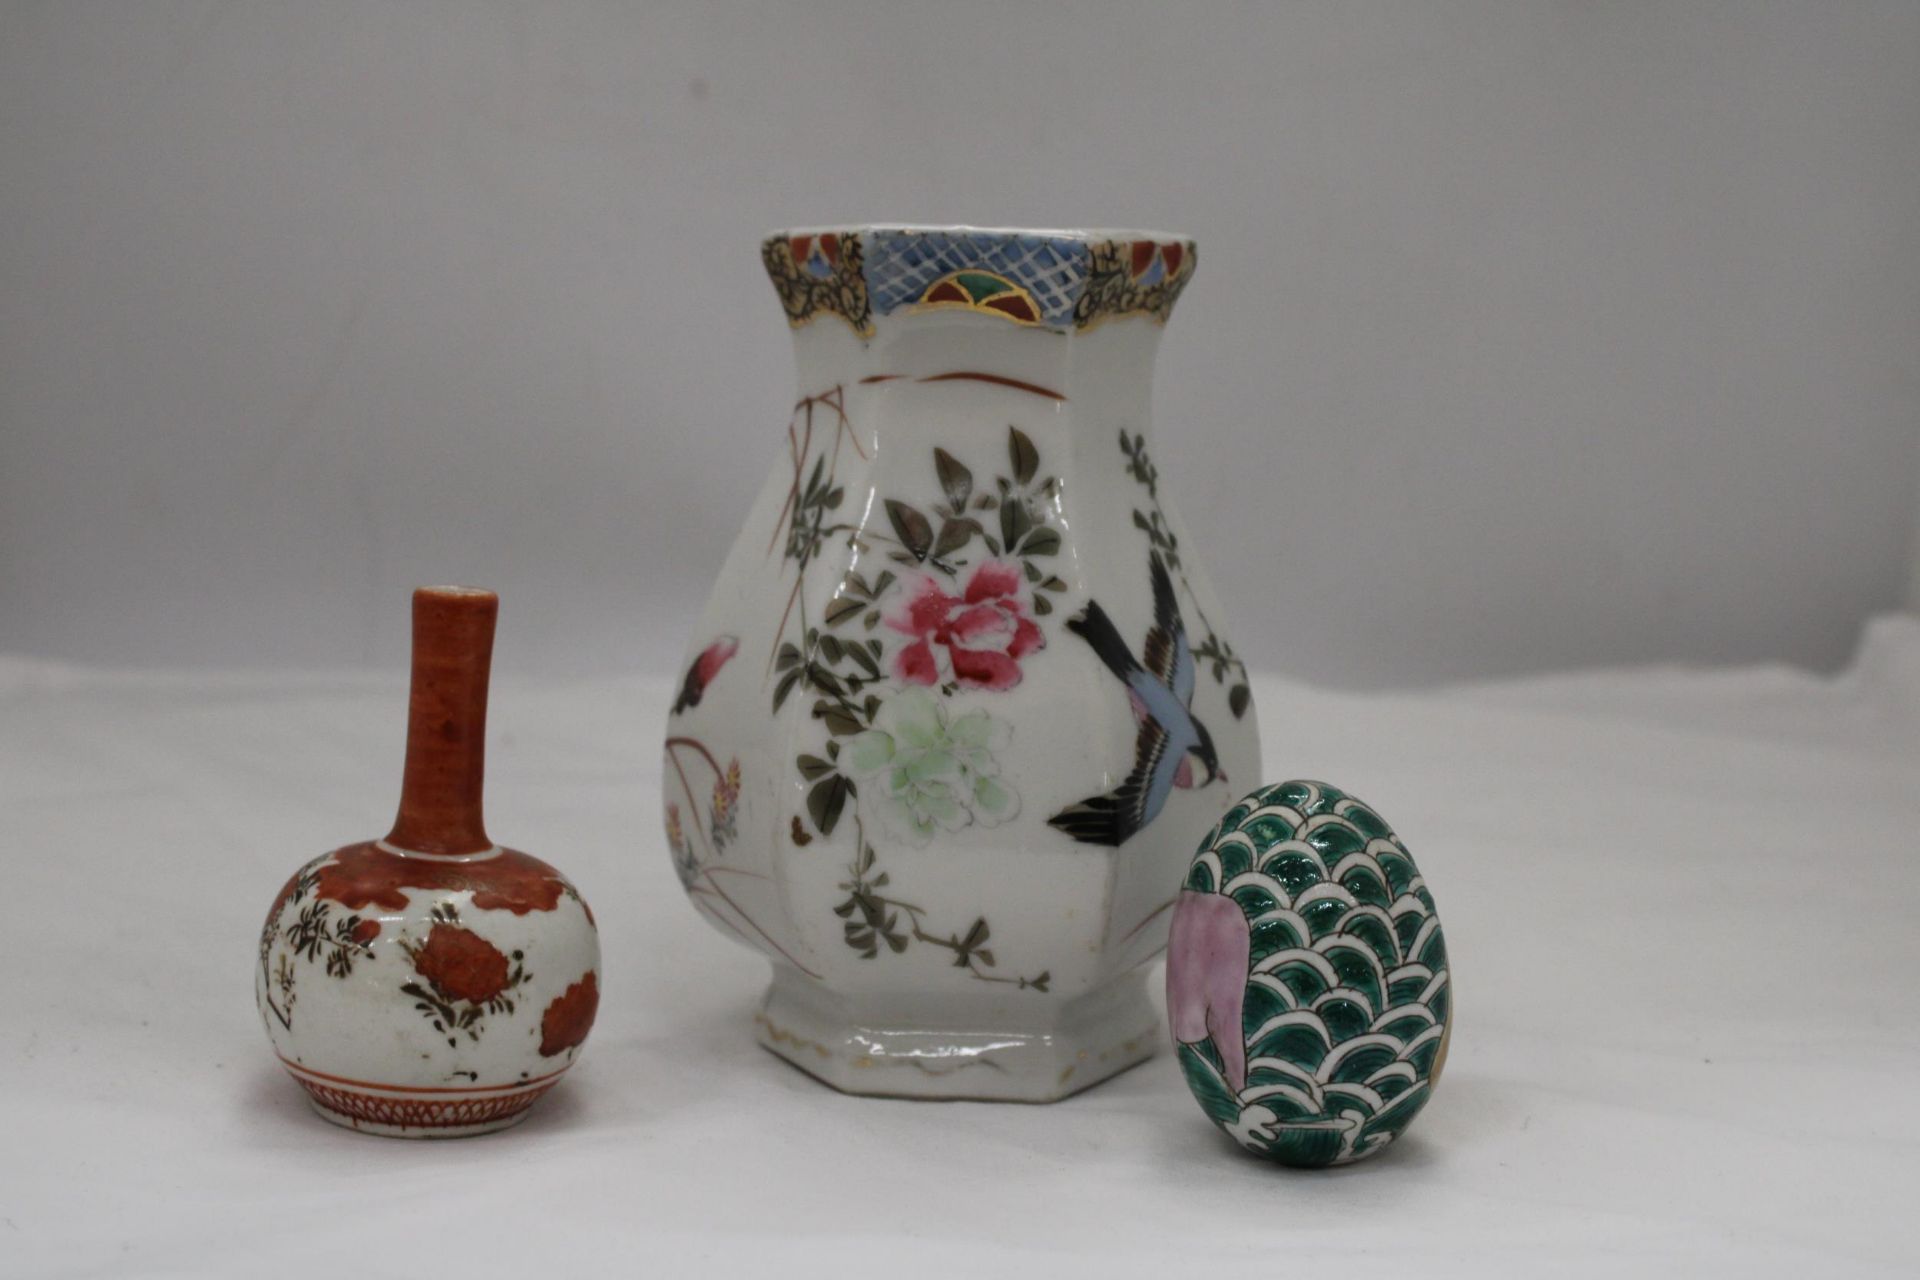 AN ORIENTAL HEXAGONAL VASE, SMALLER ORIENTAL VASE AND DECORATED EGG - Image 5 of 6